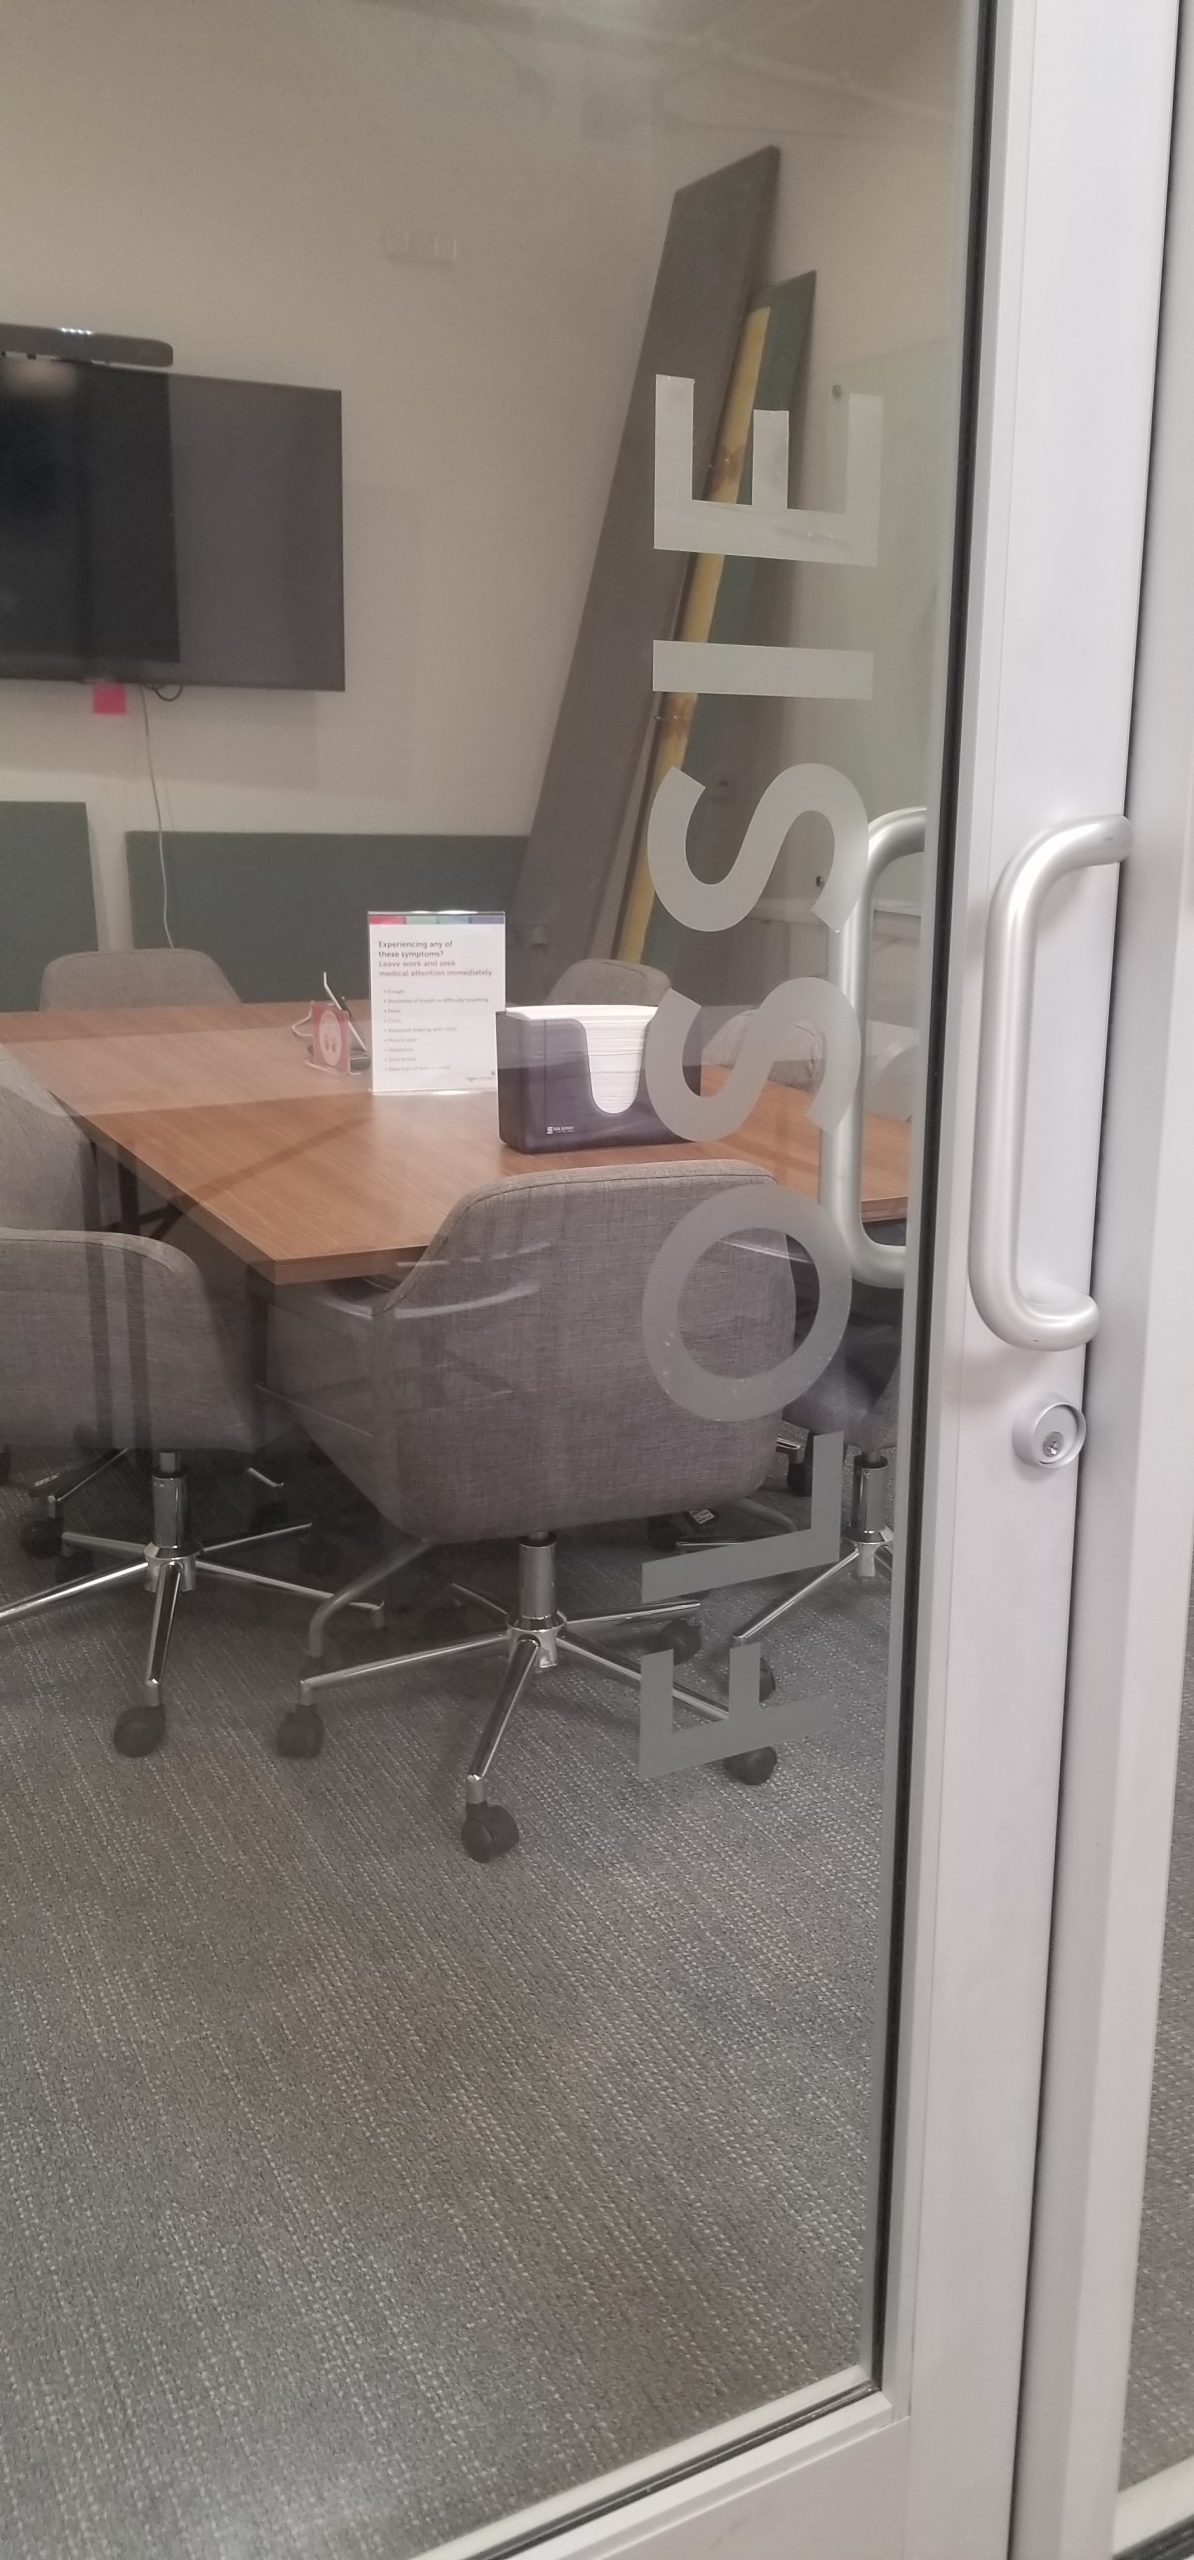 A part of the Office Design Package for Tiger Connect in Santa Monica. The frosted glass vinyl names each conference room after a famous medical pioneers.